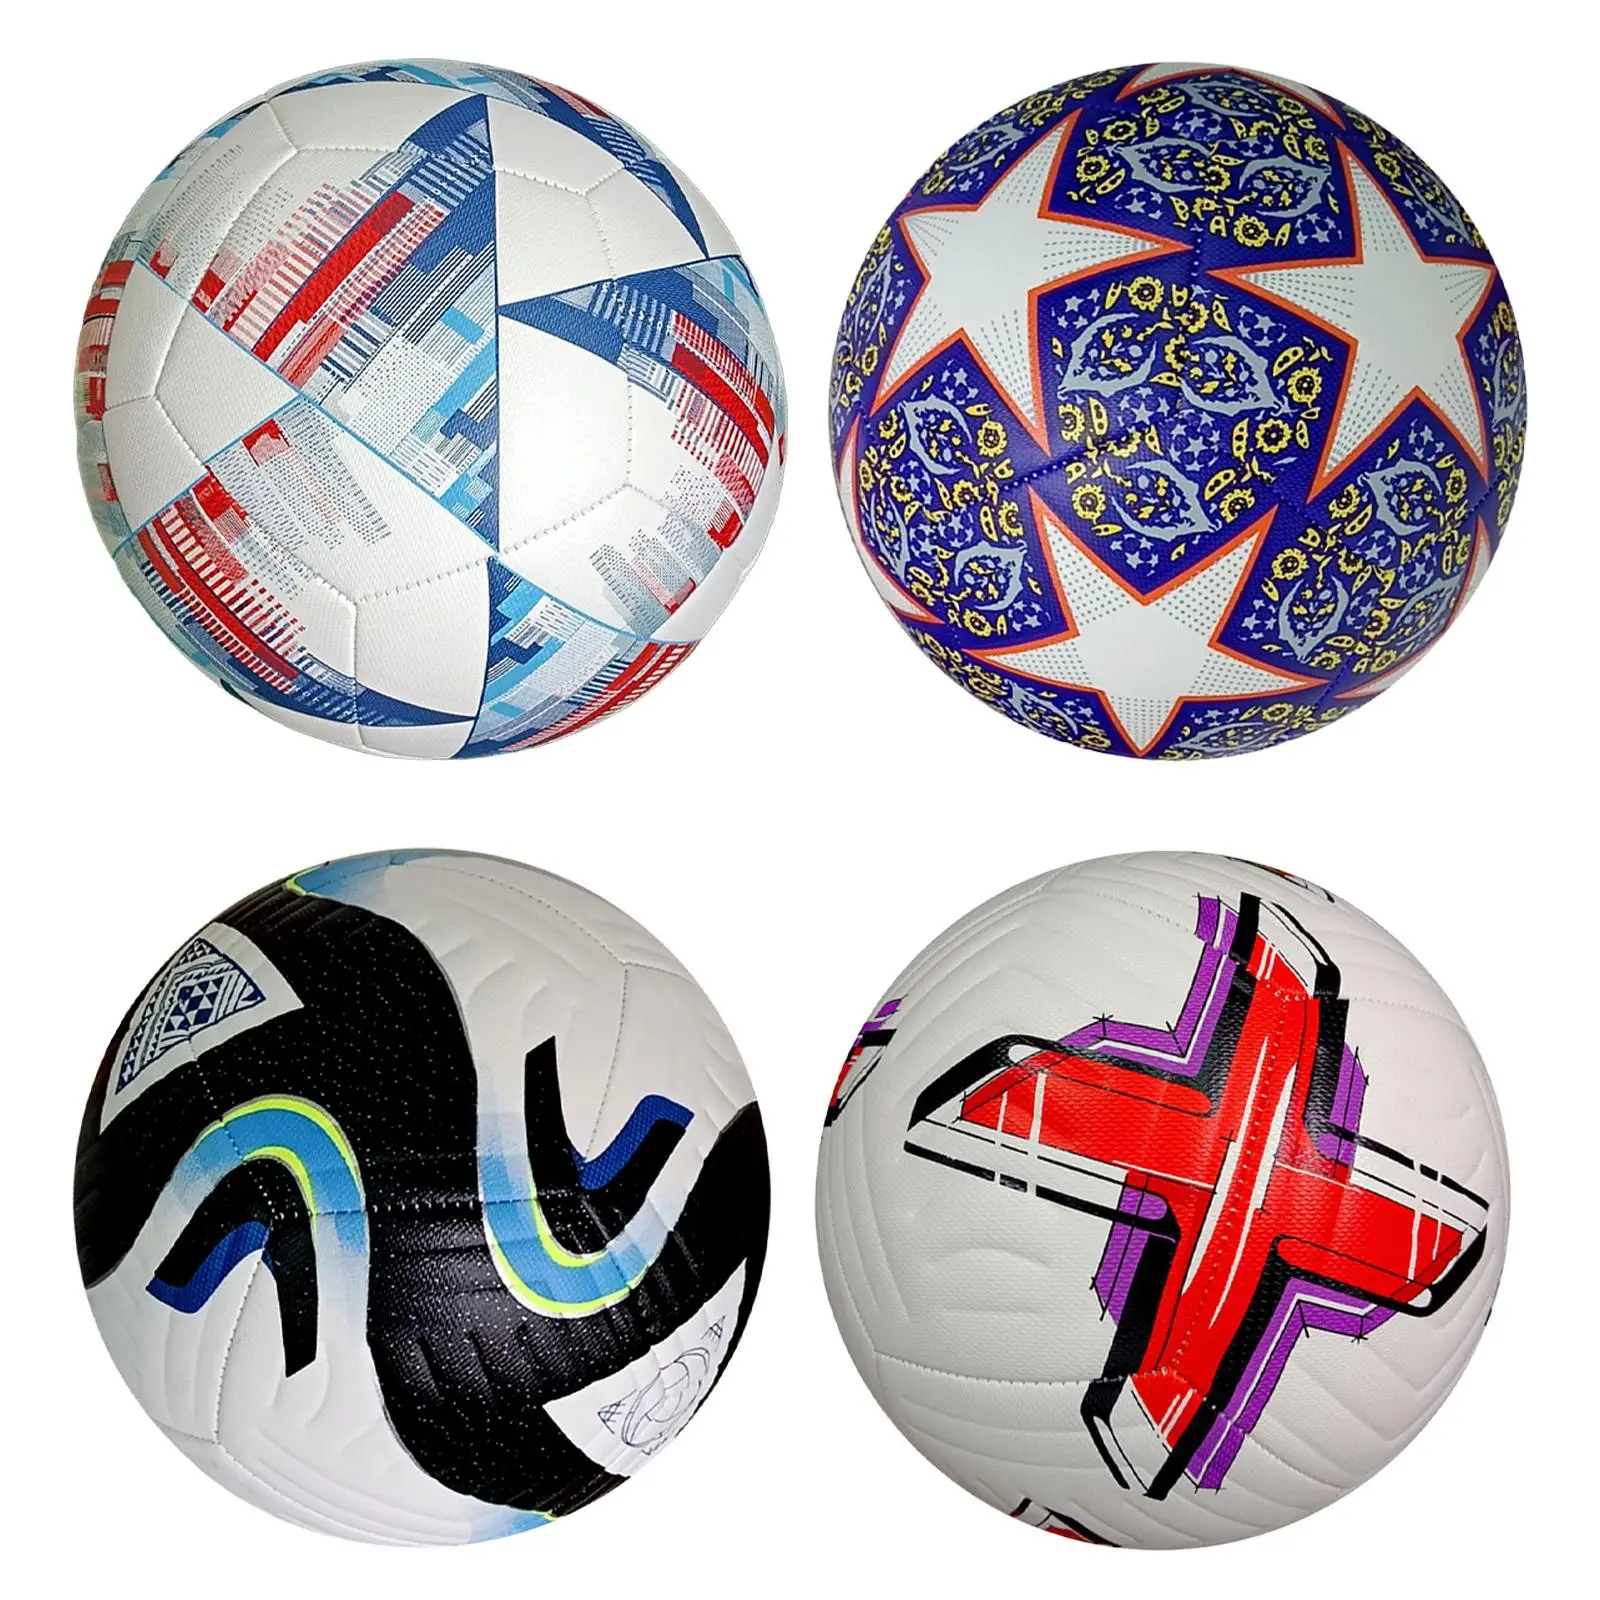 Soccer Ball Size 5 Lightweight Soccer Training Equipment Ball Sports Ball Official Match Ball for Game Club Practice Kids Gifts